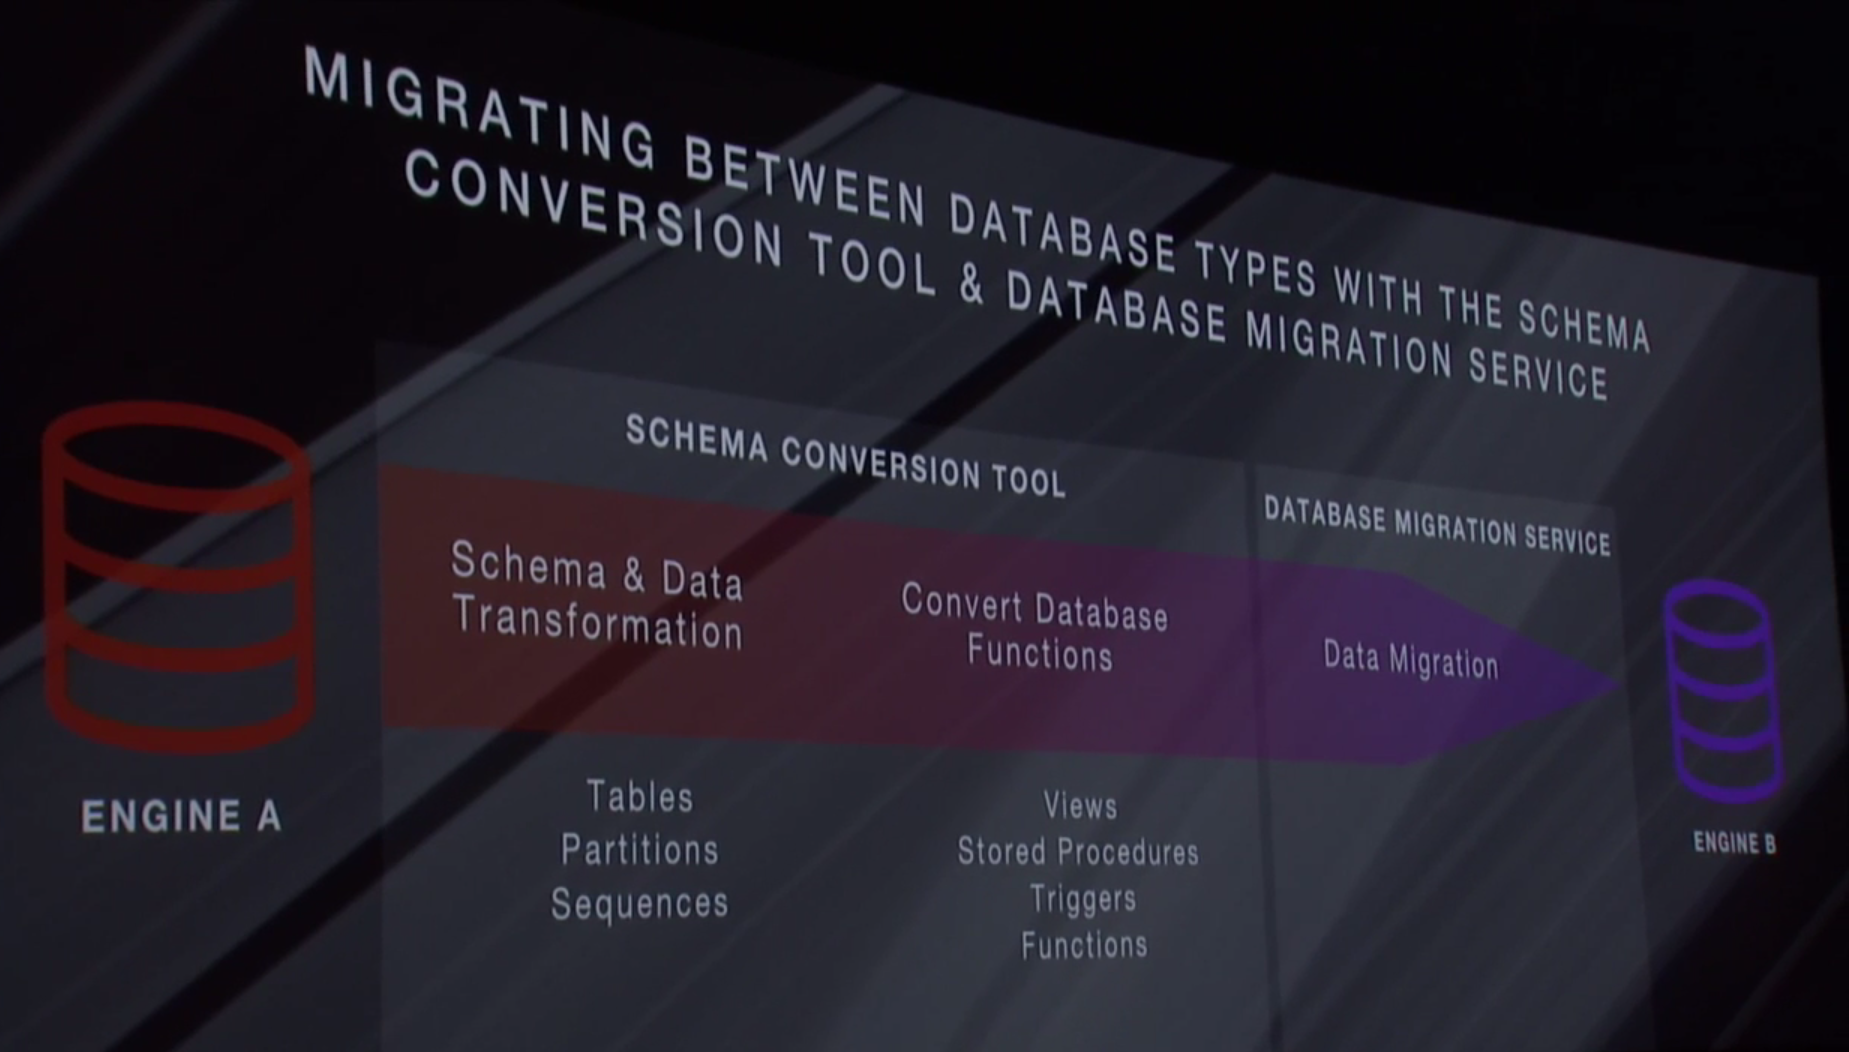 Amazon Web Services introduces its AWS Database Migration Service at the AWS re:Invent conference in Las Vegas on Oct. 7.